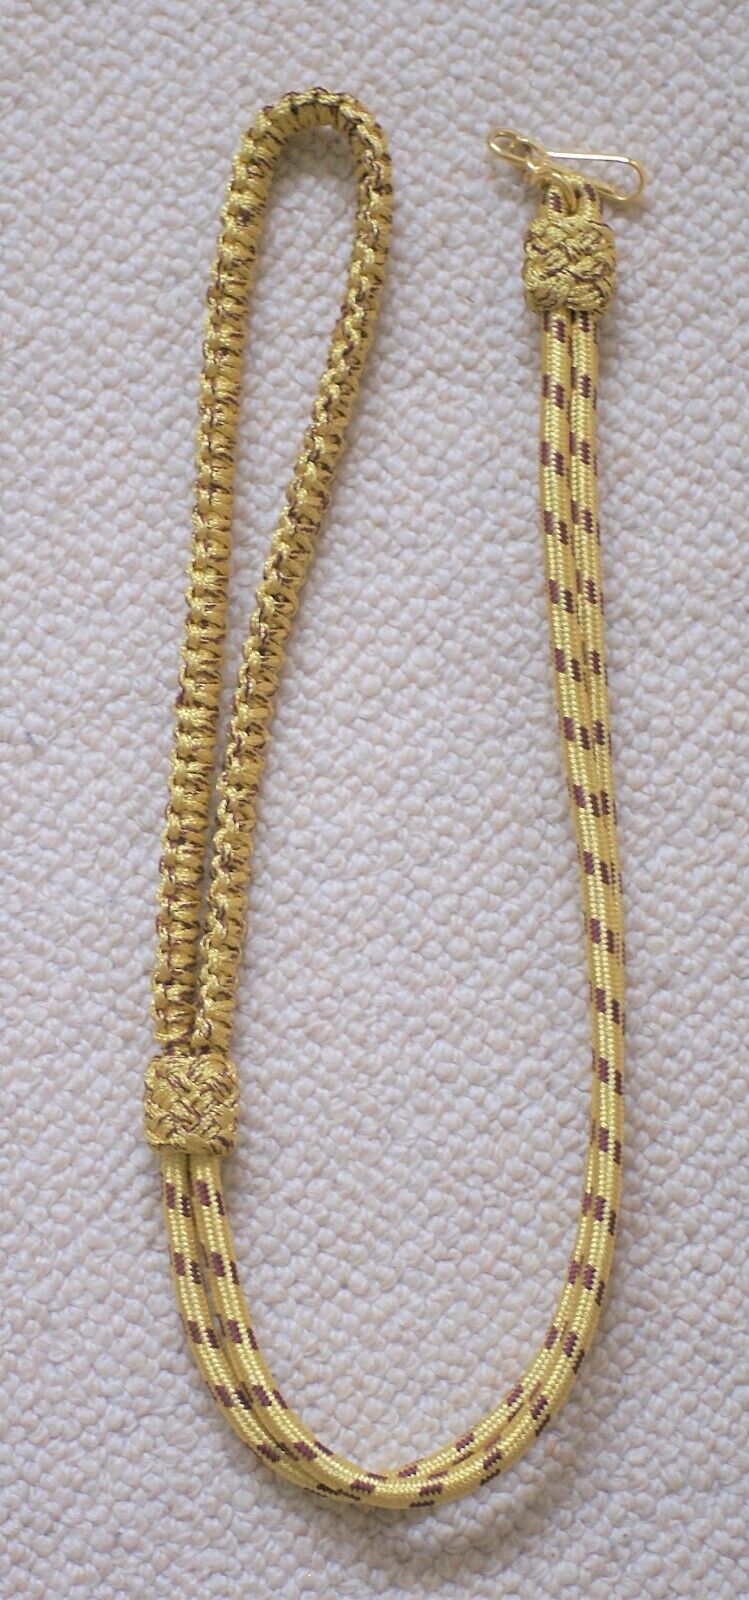 Military lanyard / aiguillette in gold bullion and burgundy wire